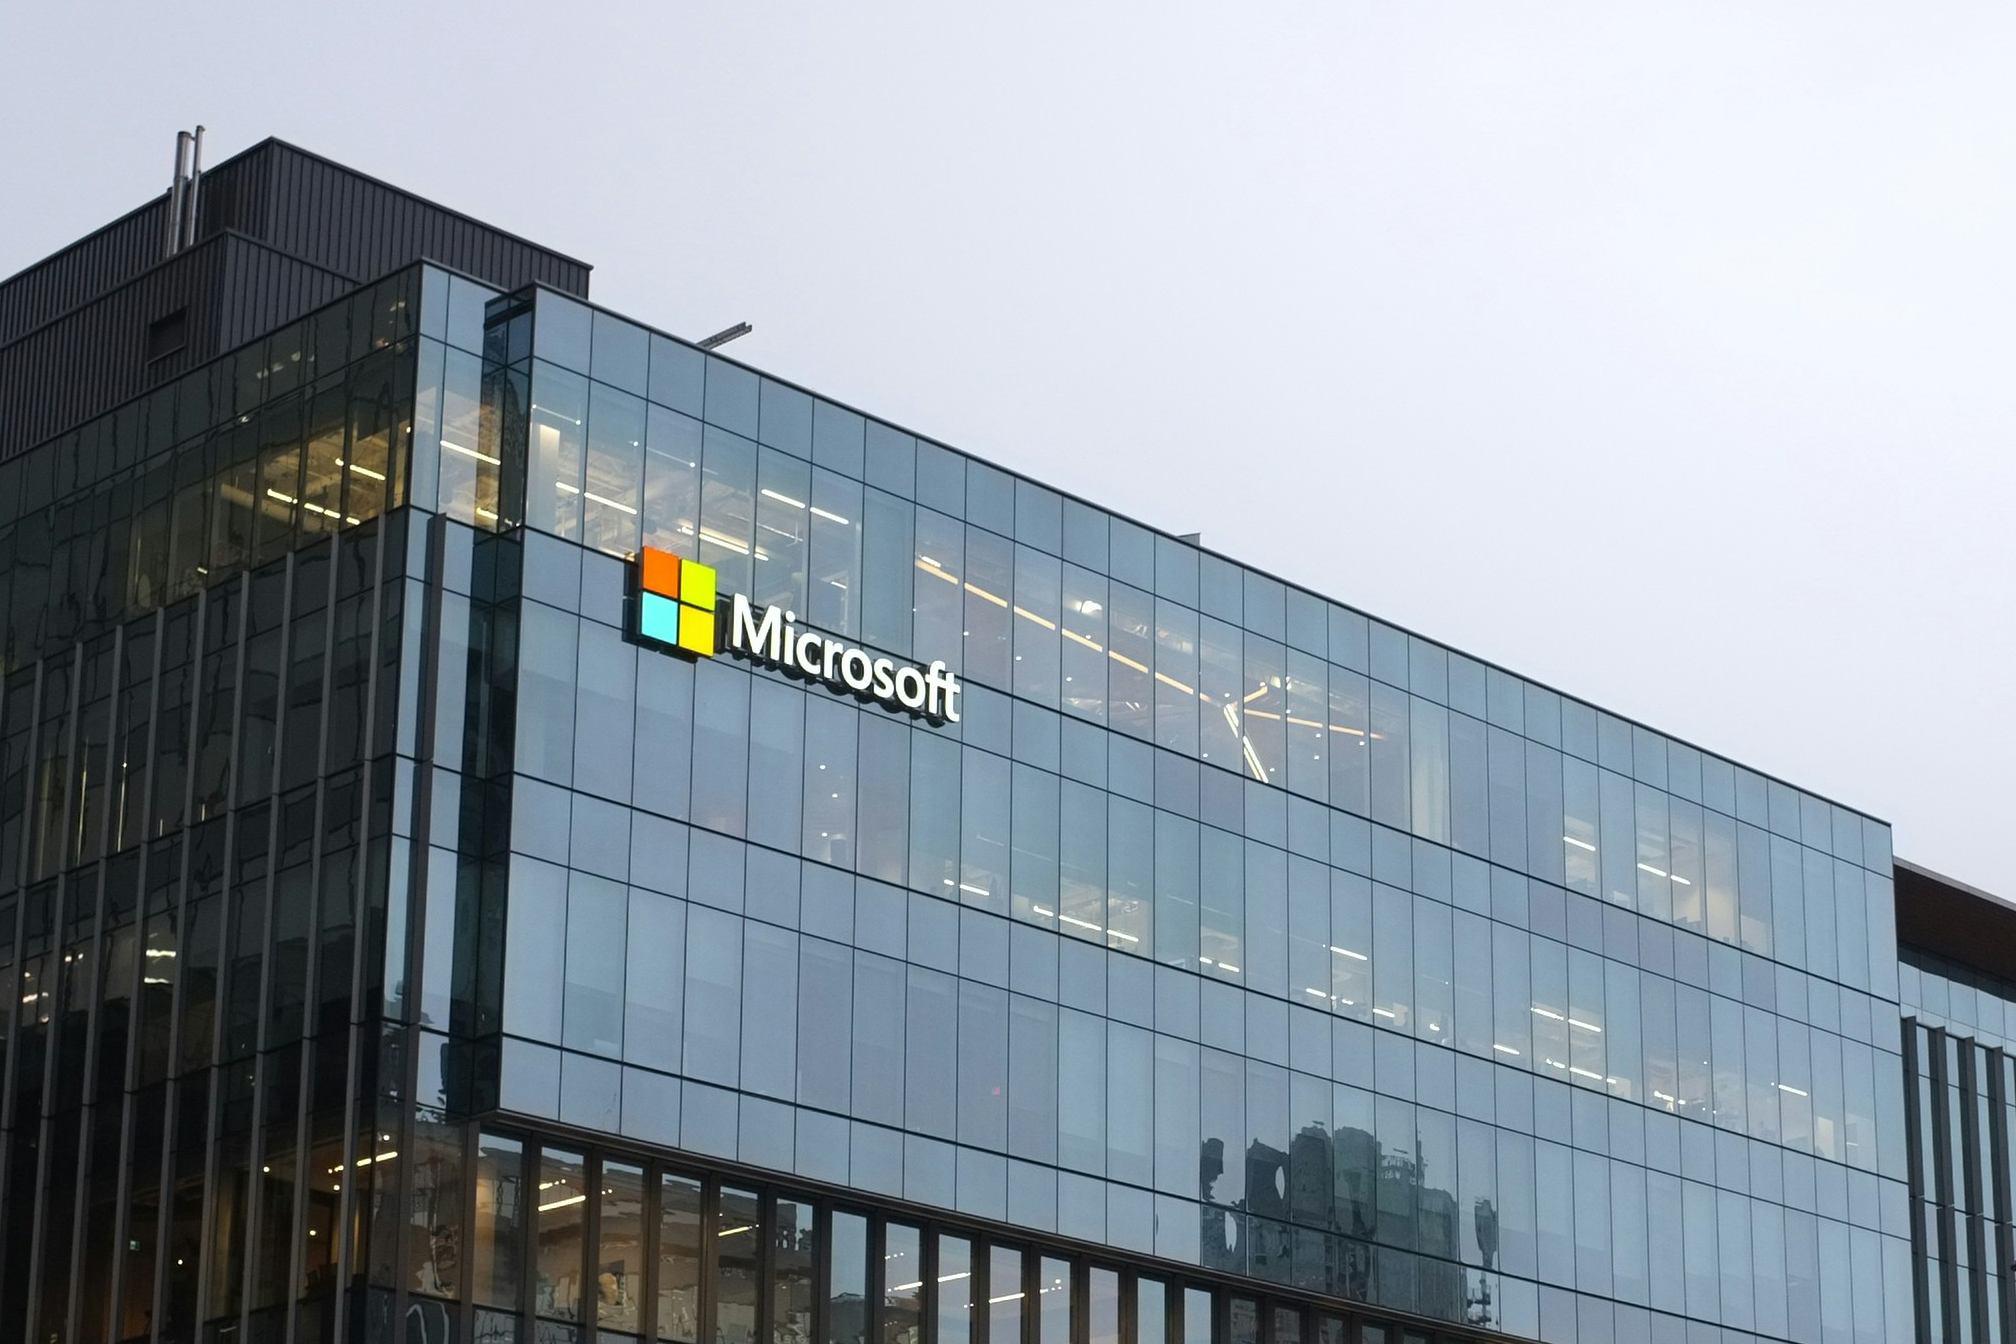 Russian hackers hacked Microsoft thanks to weak corporate network security